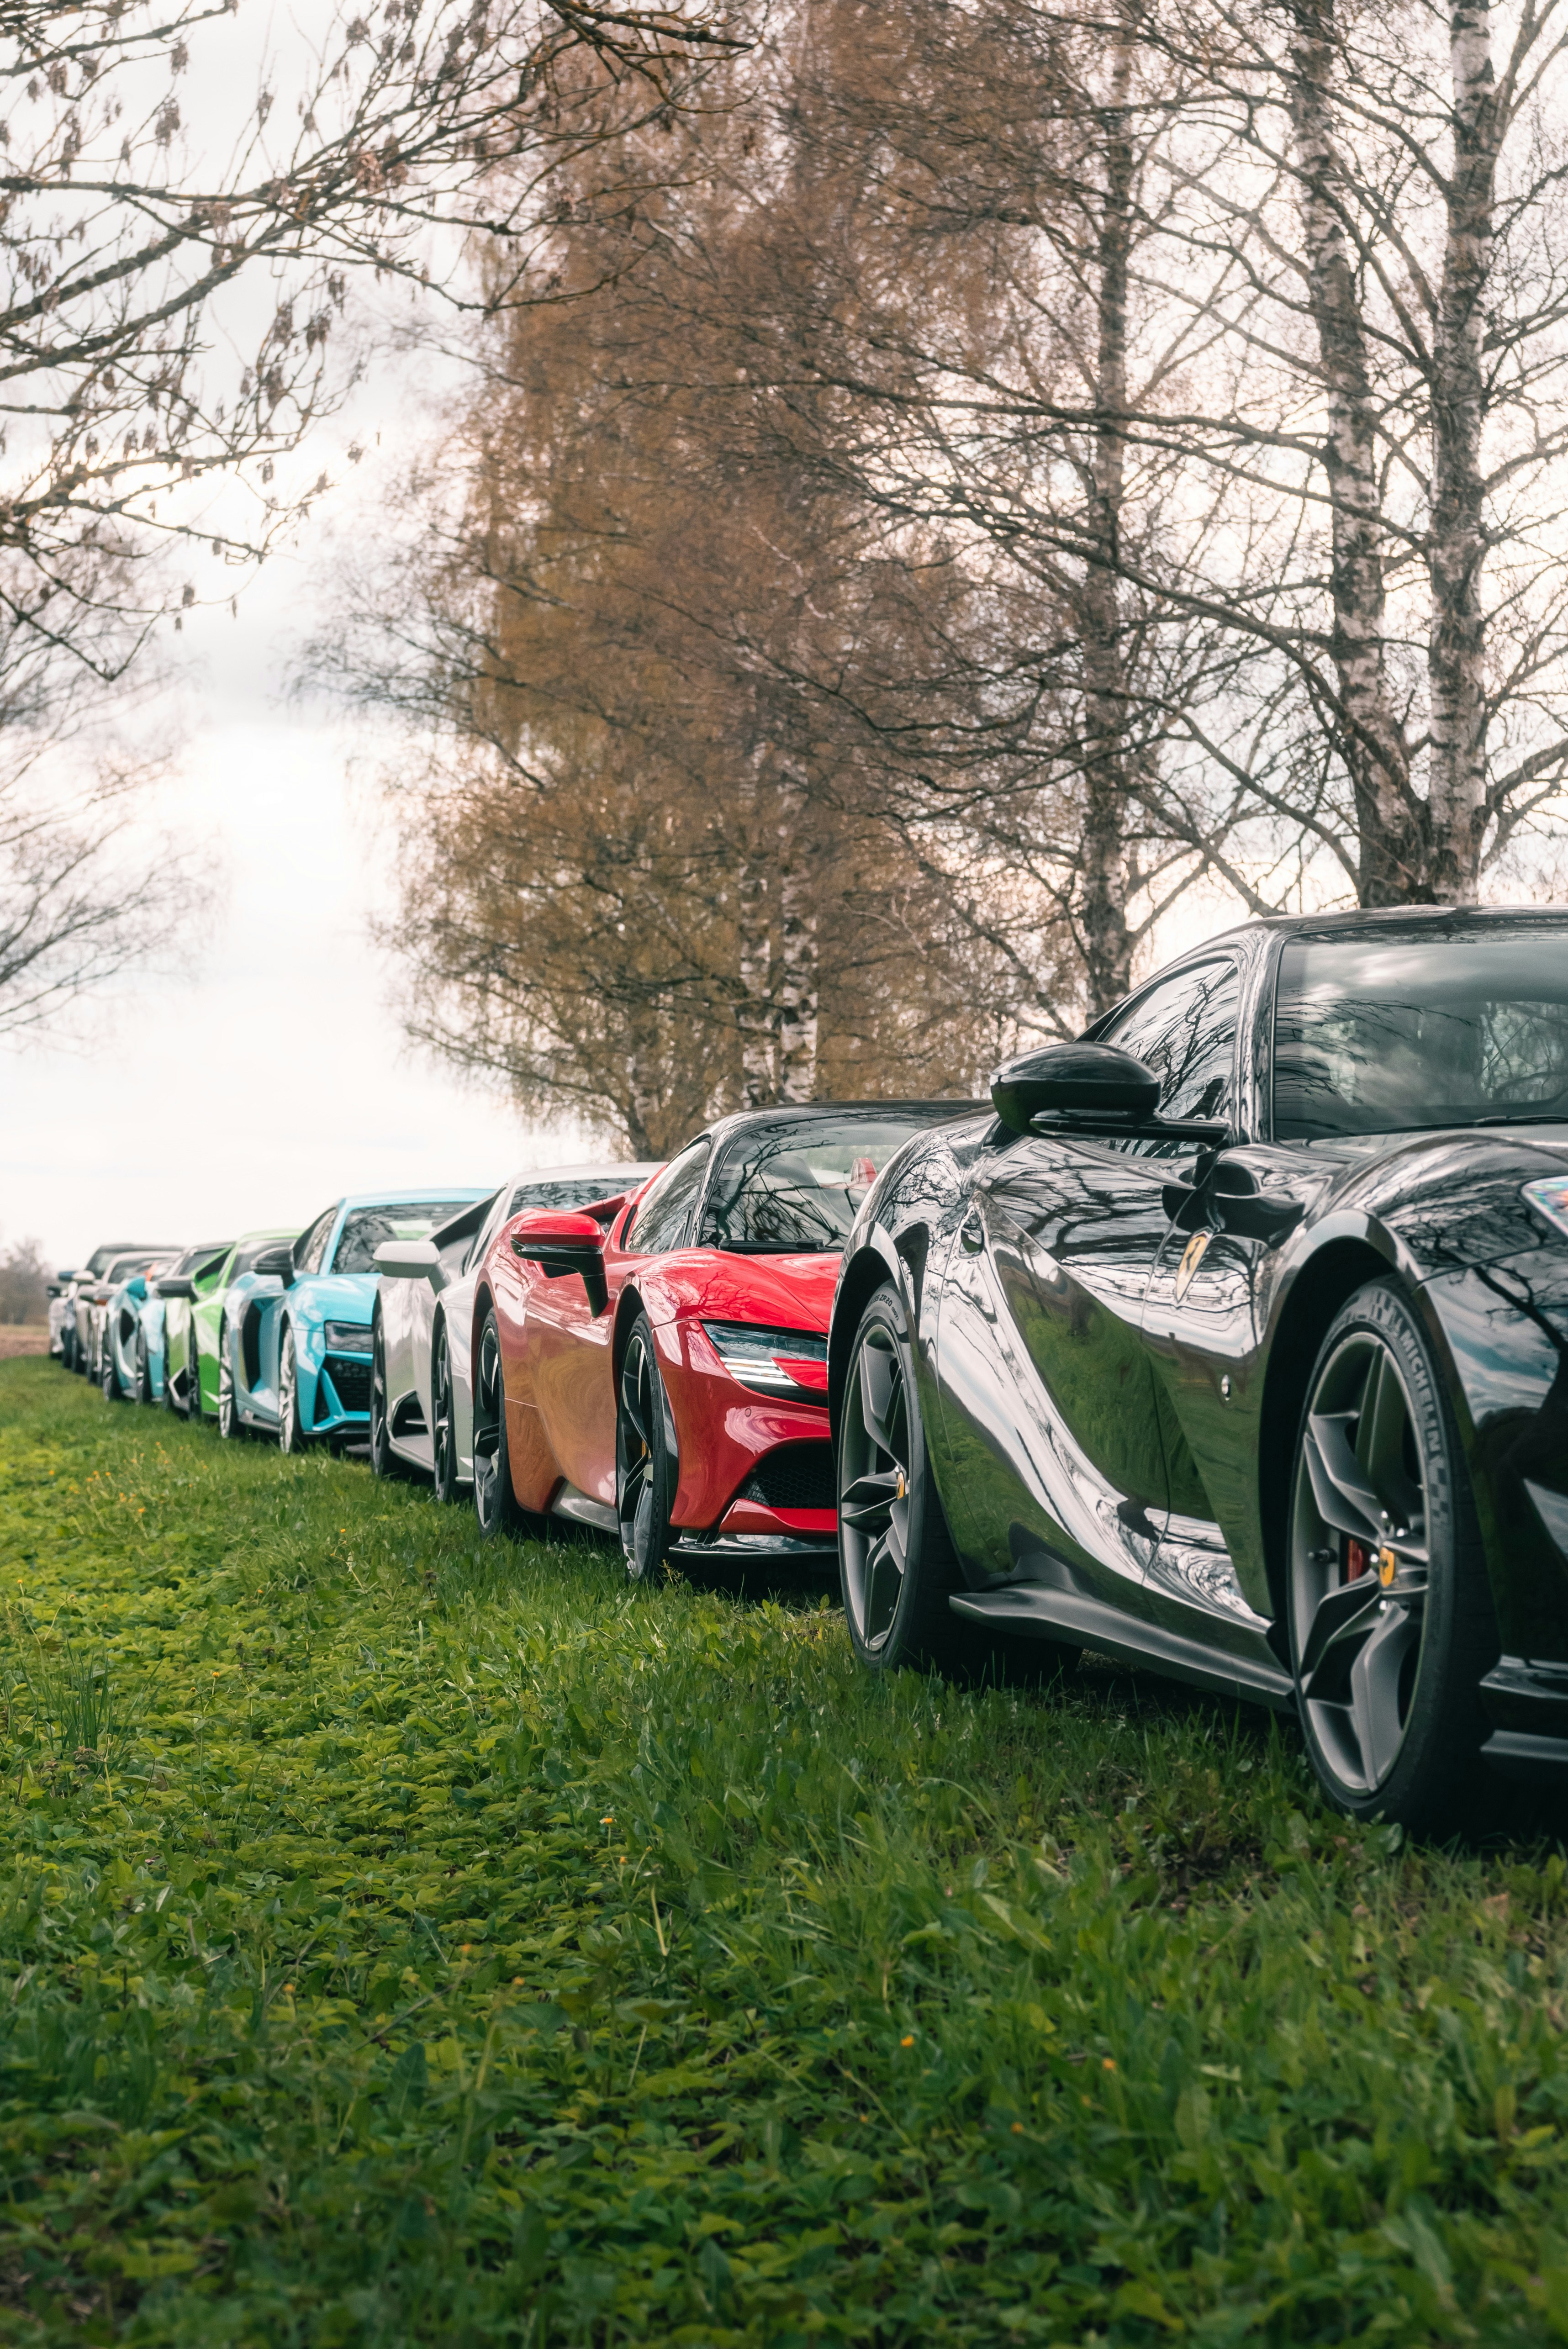 A row of sports cars parked on a grass covered field photo